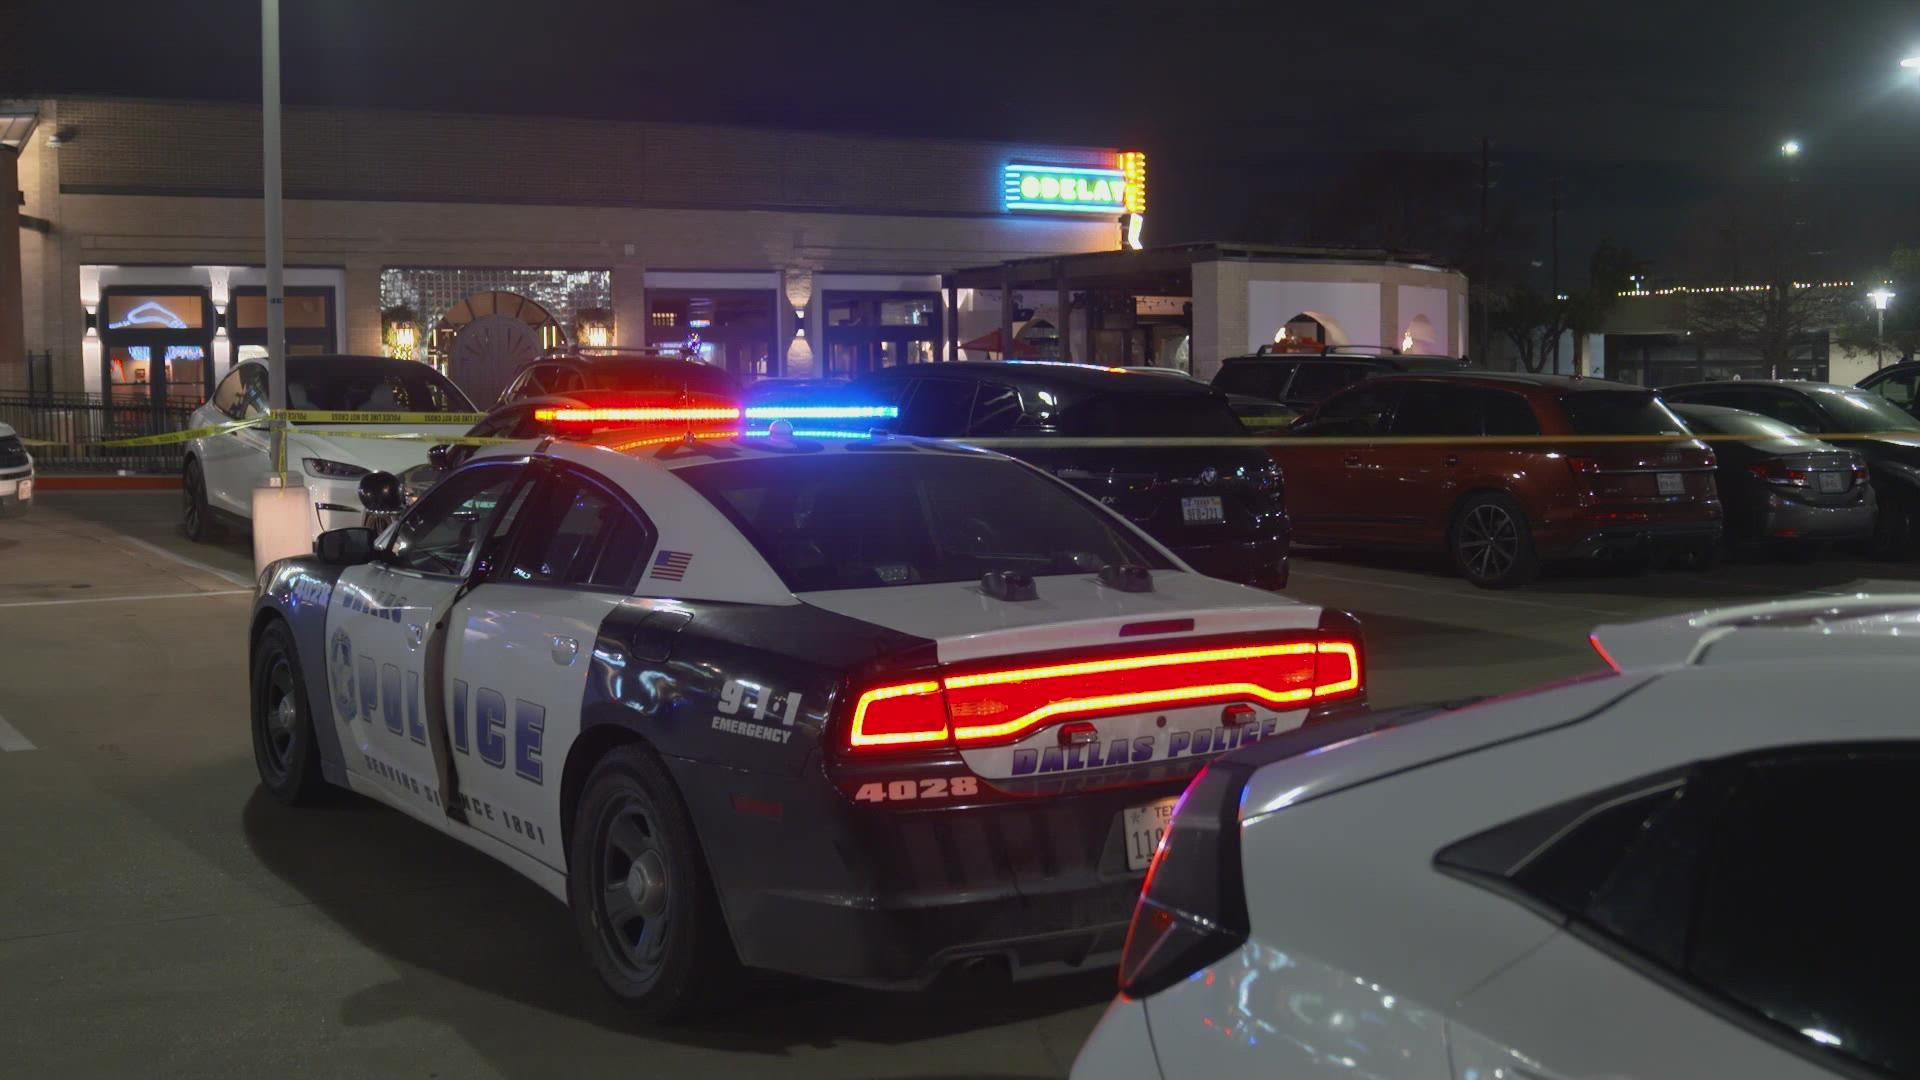 A suspect was shot during an attempted carjacking Friday night, the Dallas Police Department said.